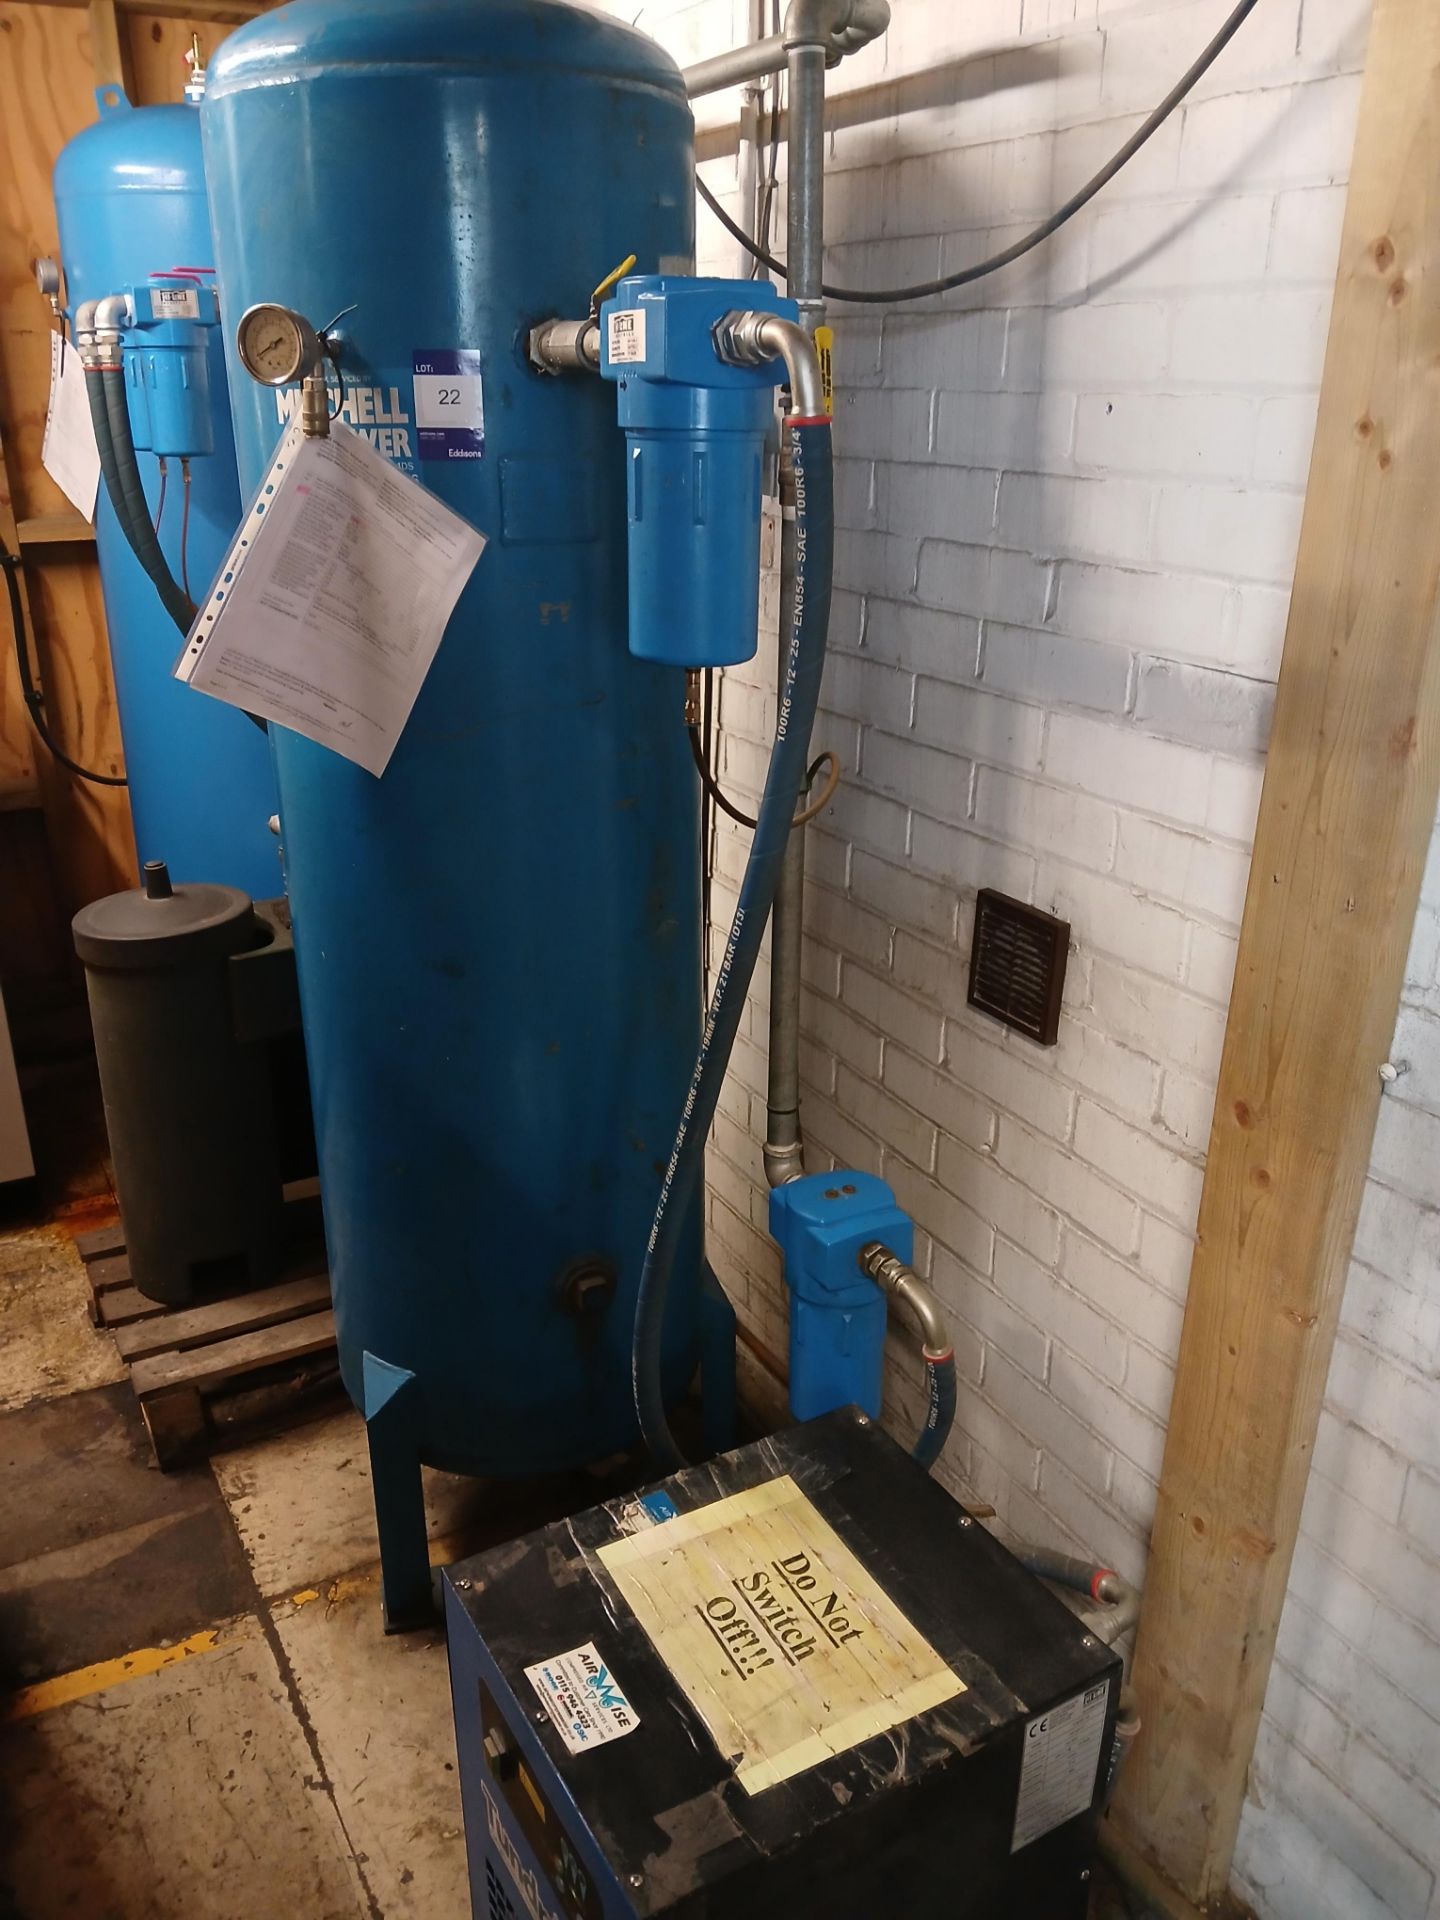 Lot comprising an AJMP c.450 litre air receiver tank and Tundra 120 air dryer and filters.